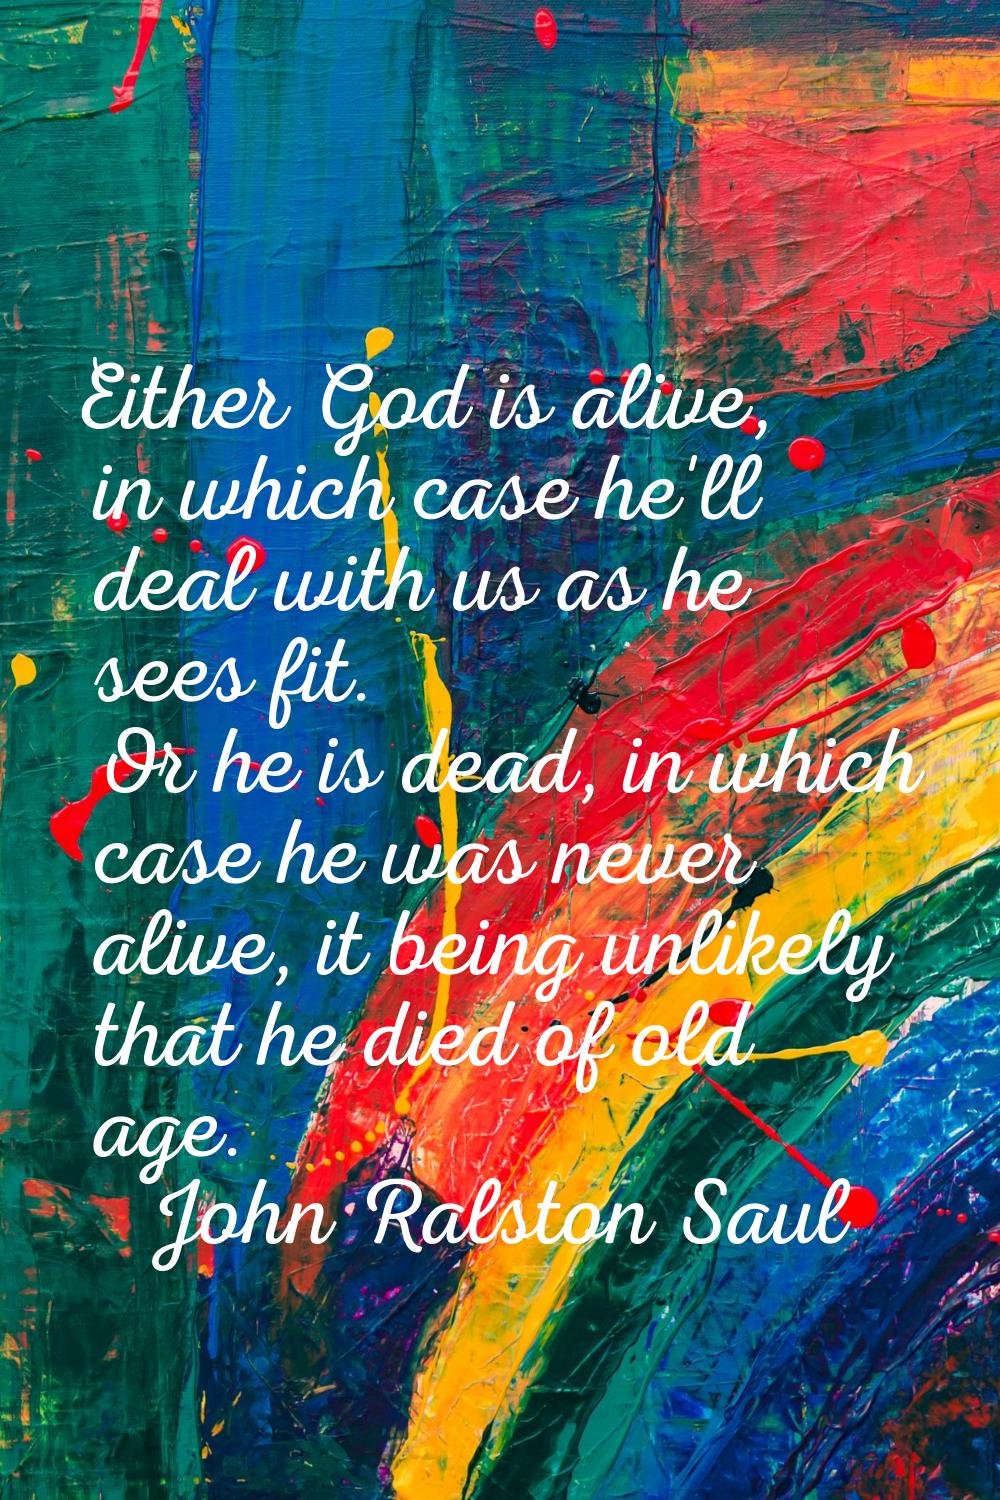 Either God is alive, in which case he'll deal with us as he sees fit. Or he is dead, in which case 